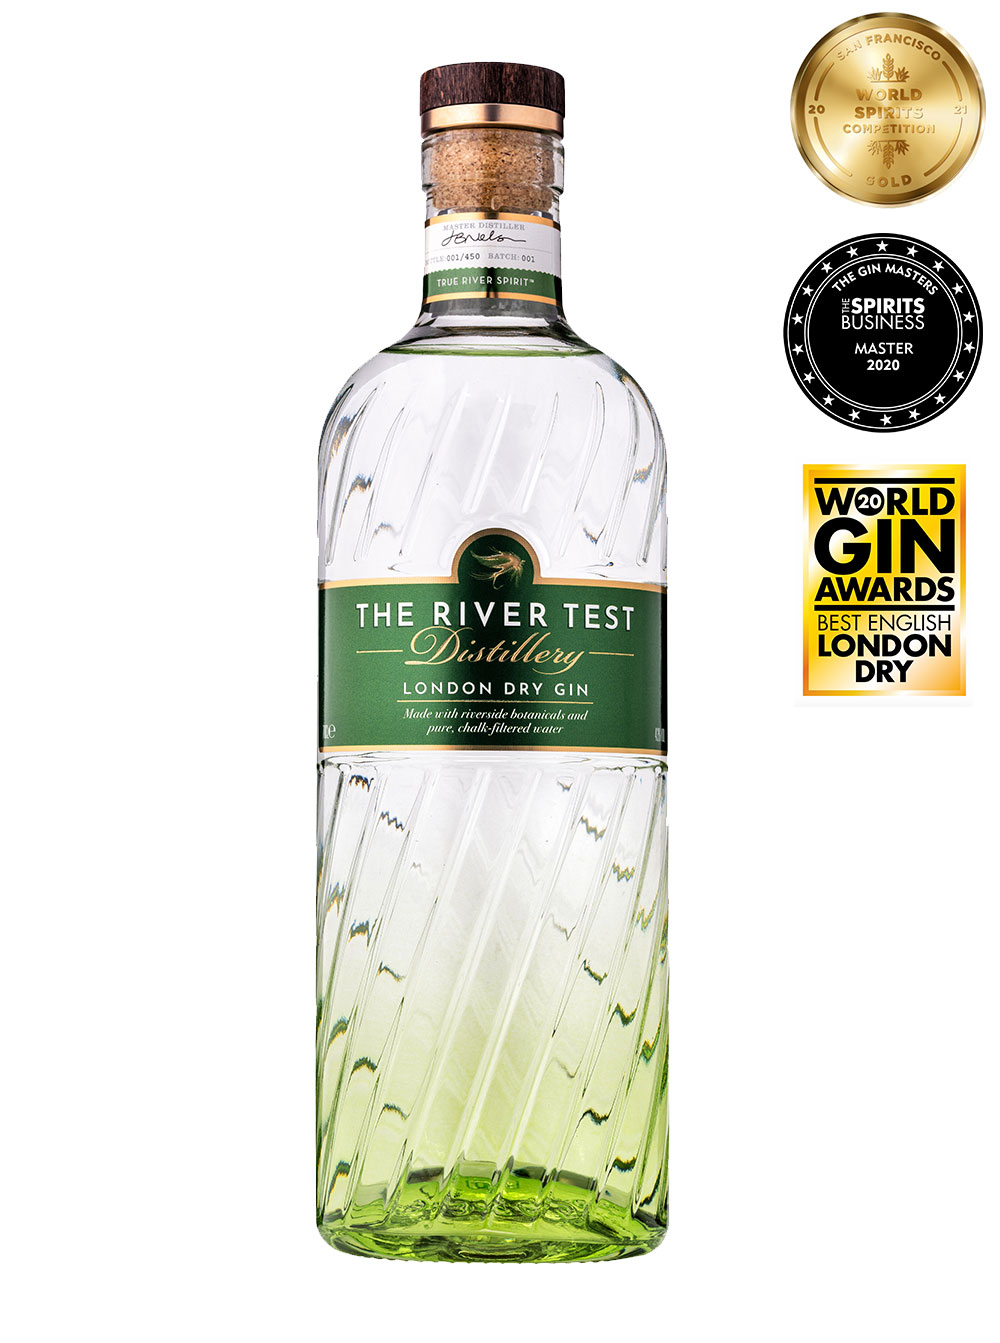 The River Test Distillery London Dry Gin